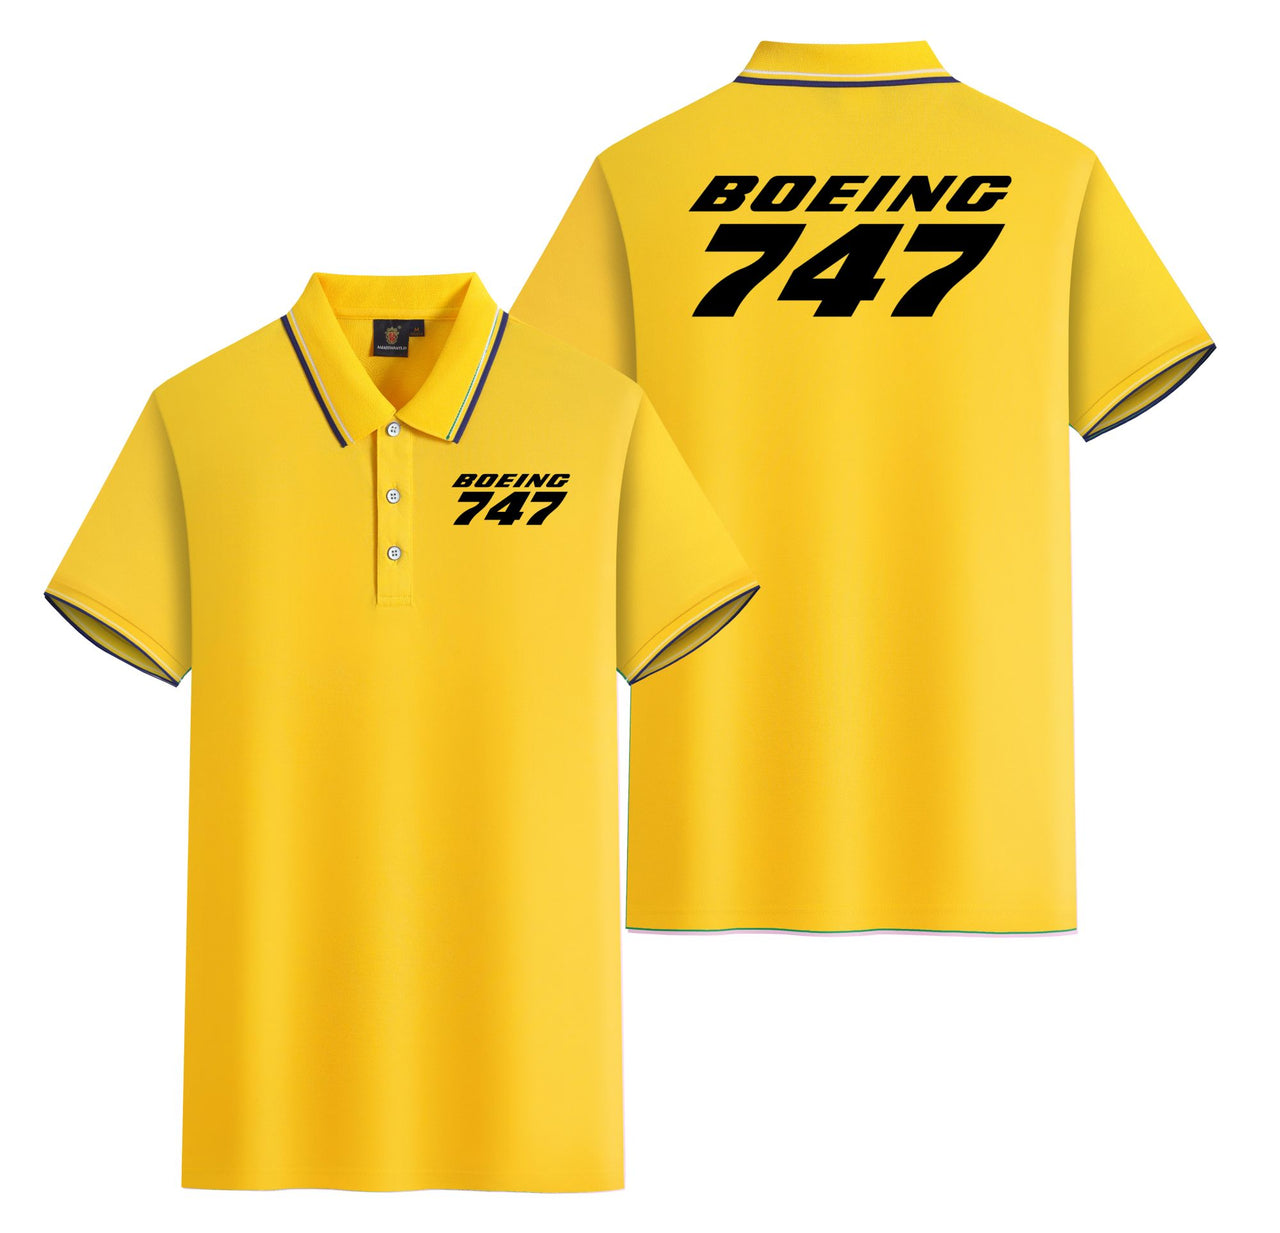 Boeing 747 & Text Designed Stylish Polo T-Shirts (Double-Side)